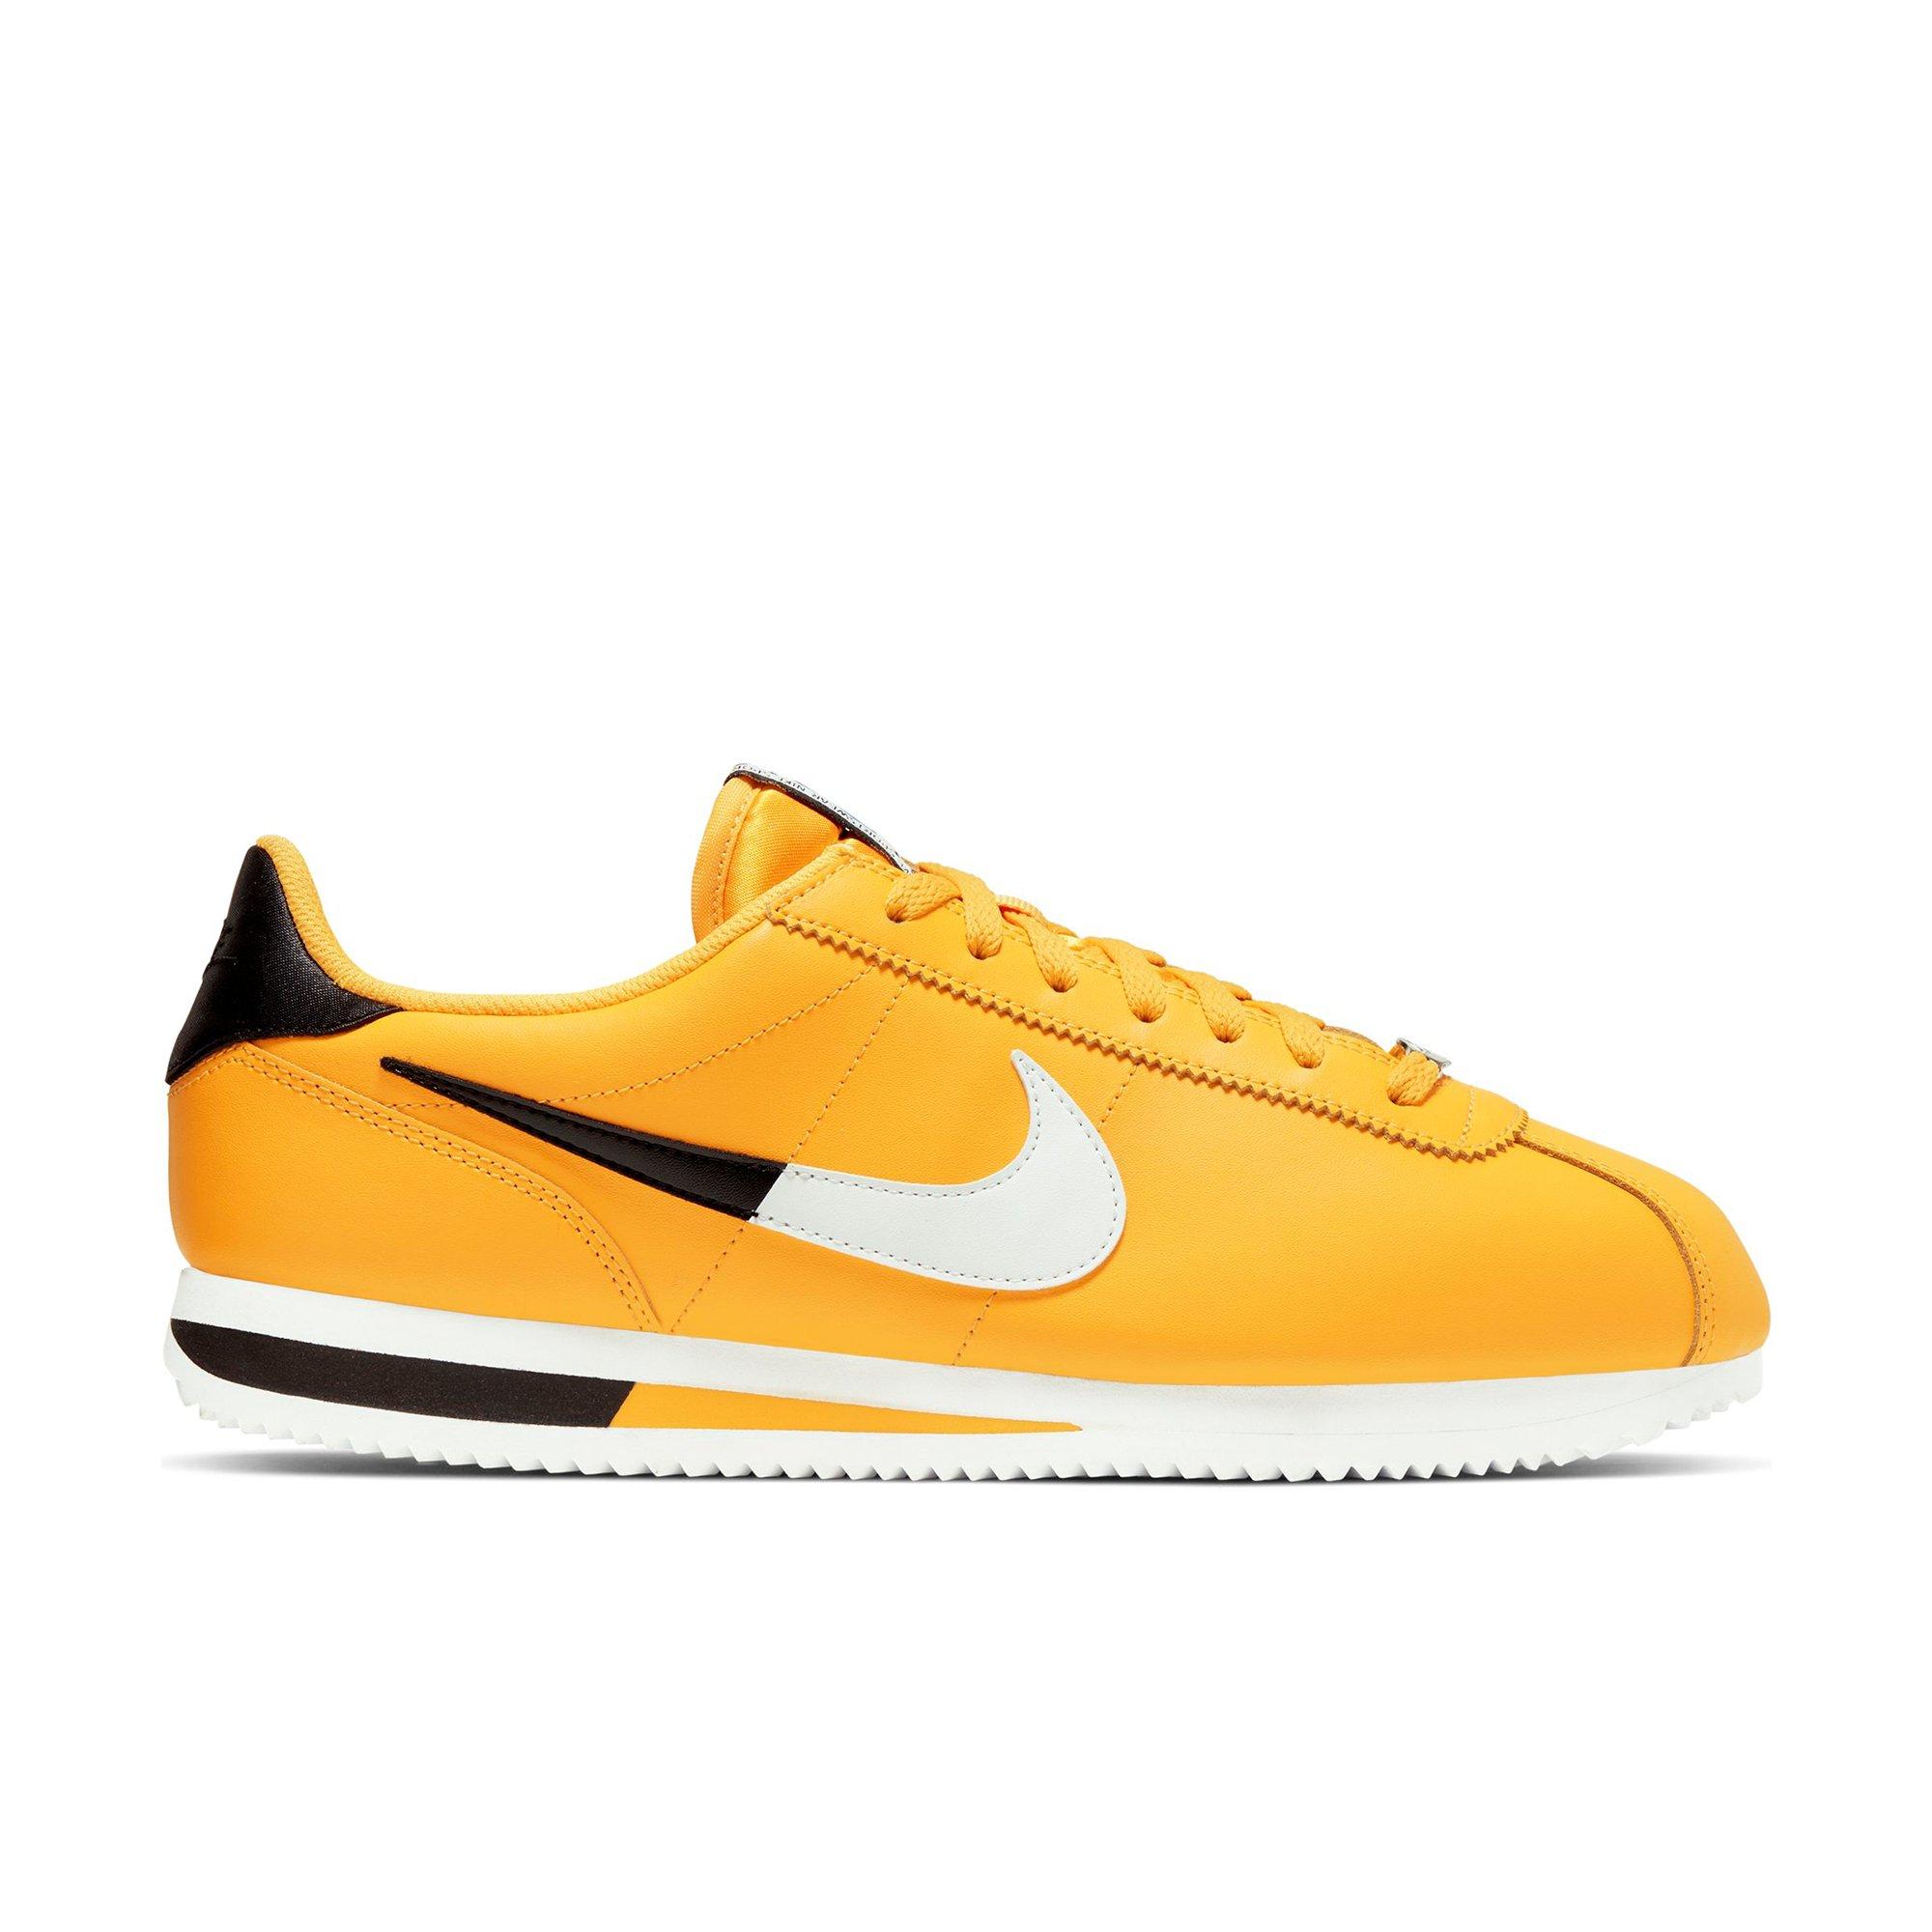 and yellow nikes - psidiagnosticins 